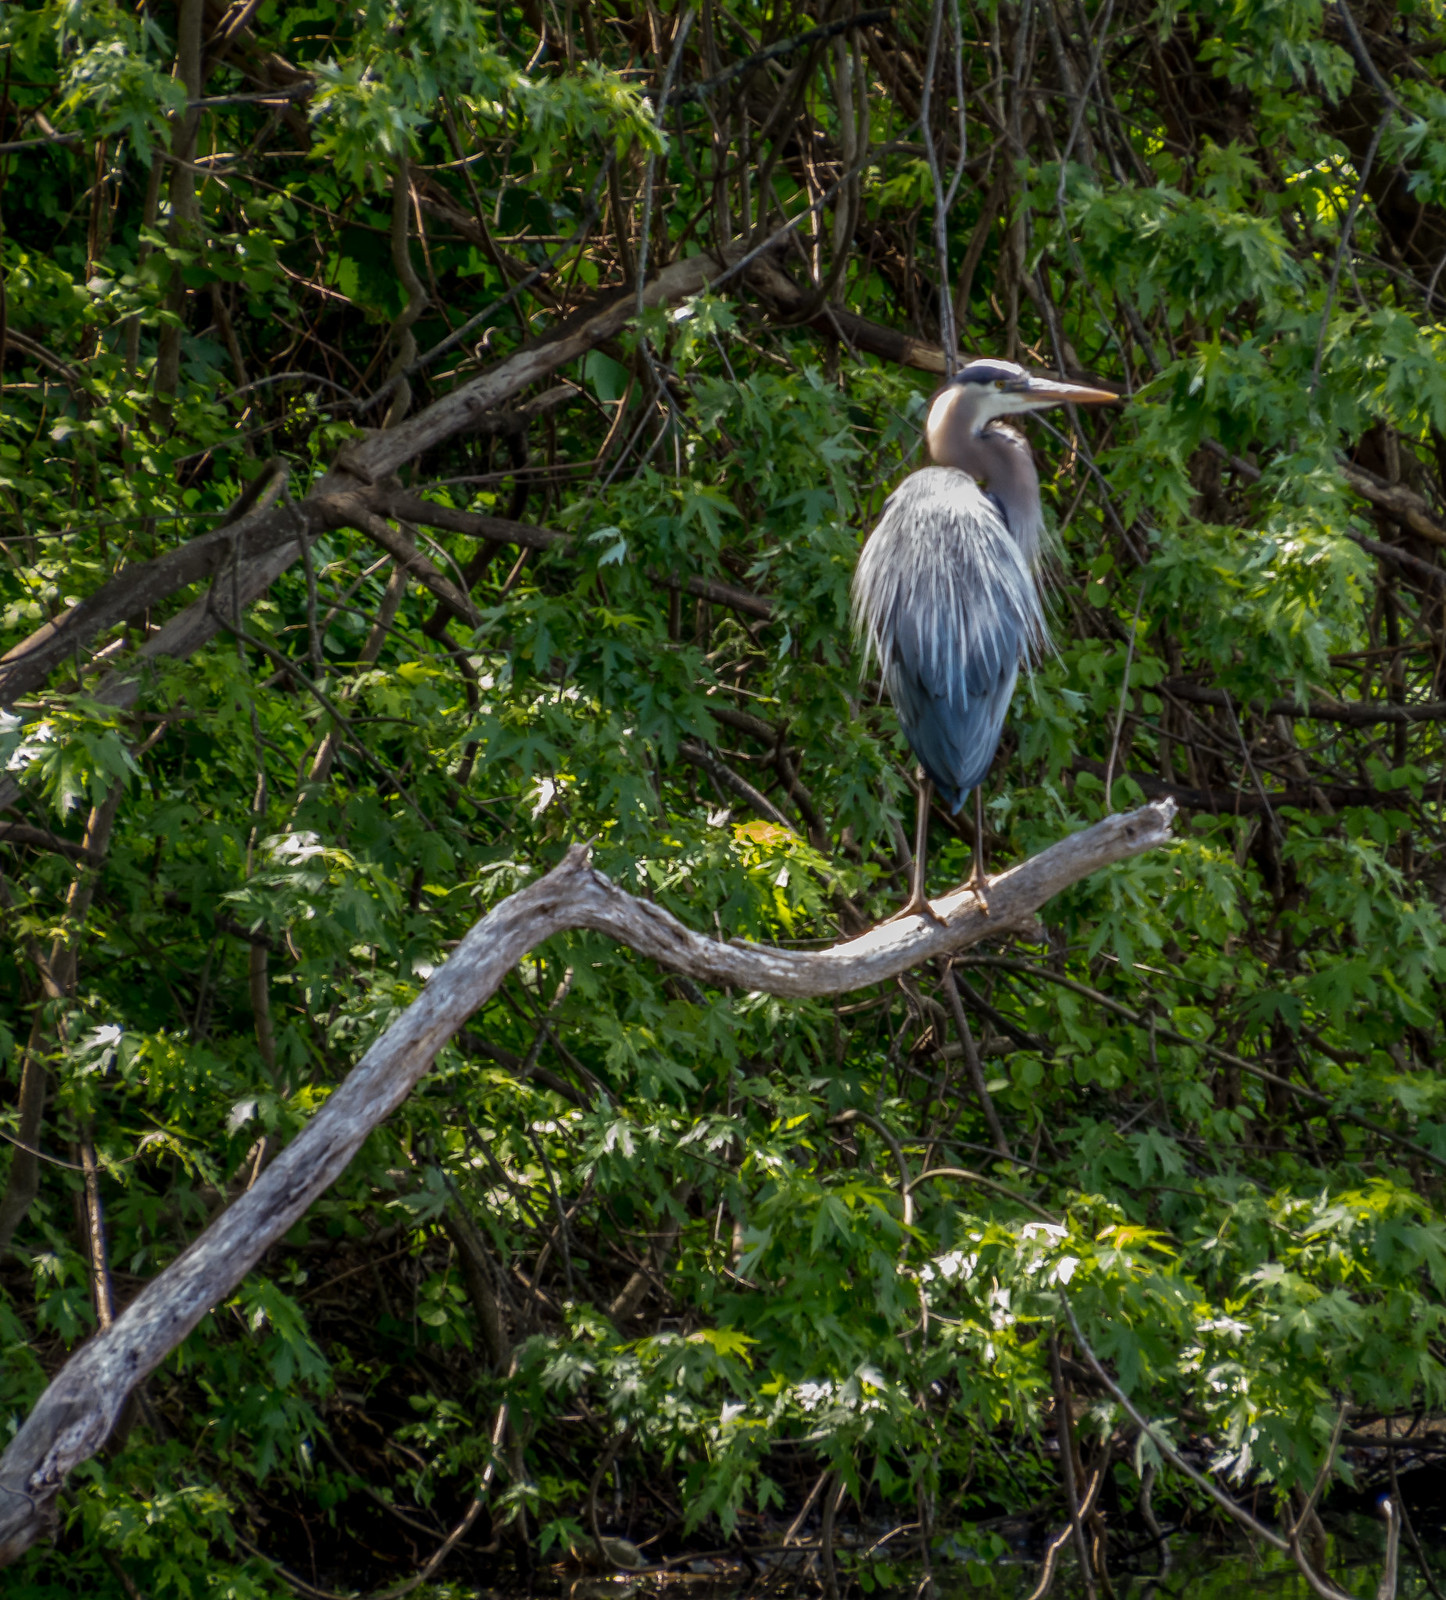 Great Blue Heron at Roger Williams Park